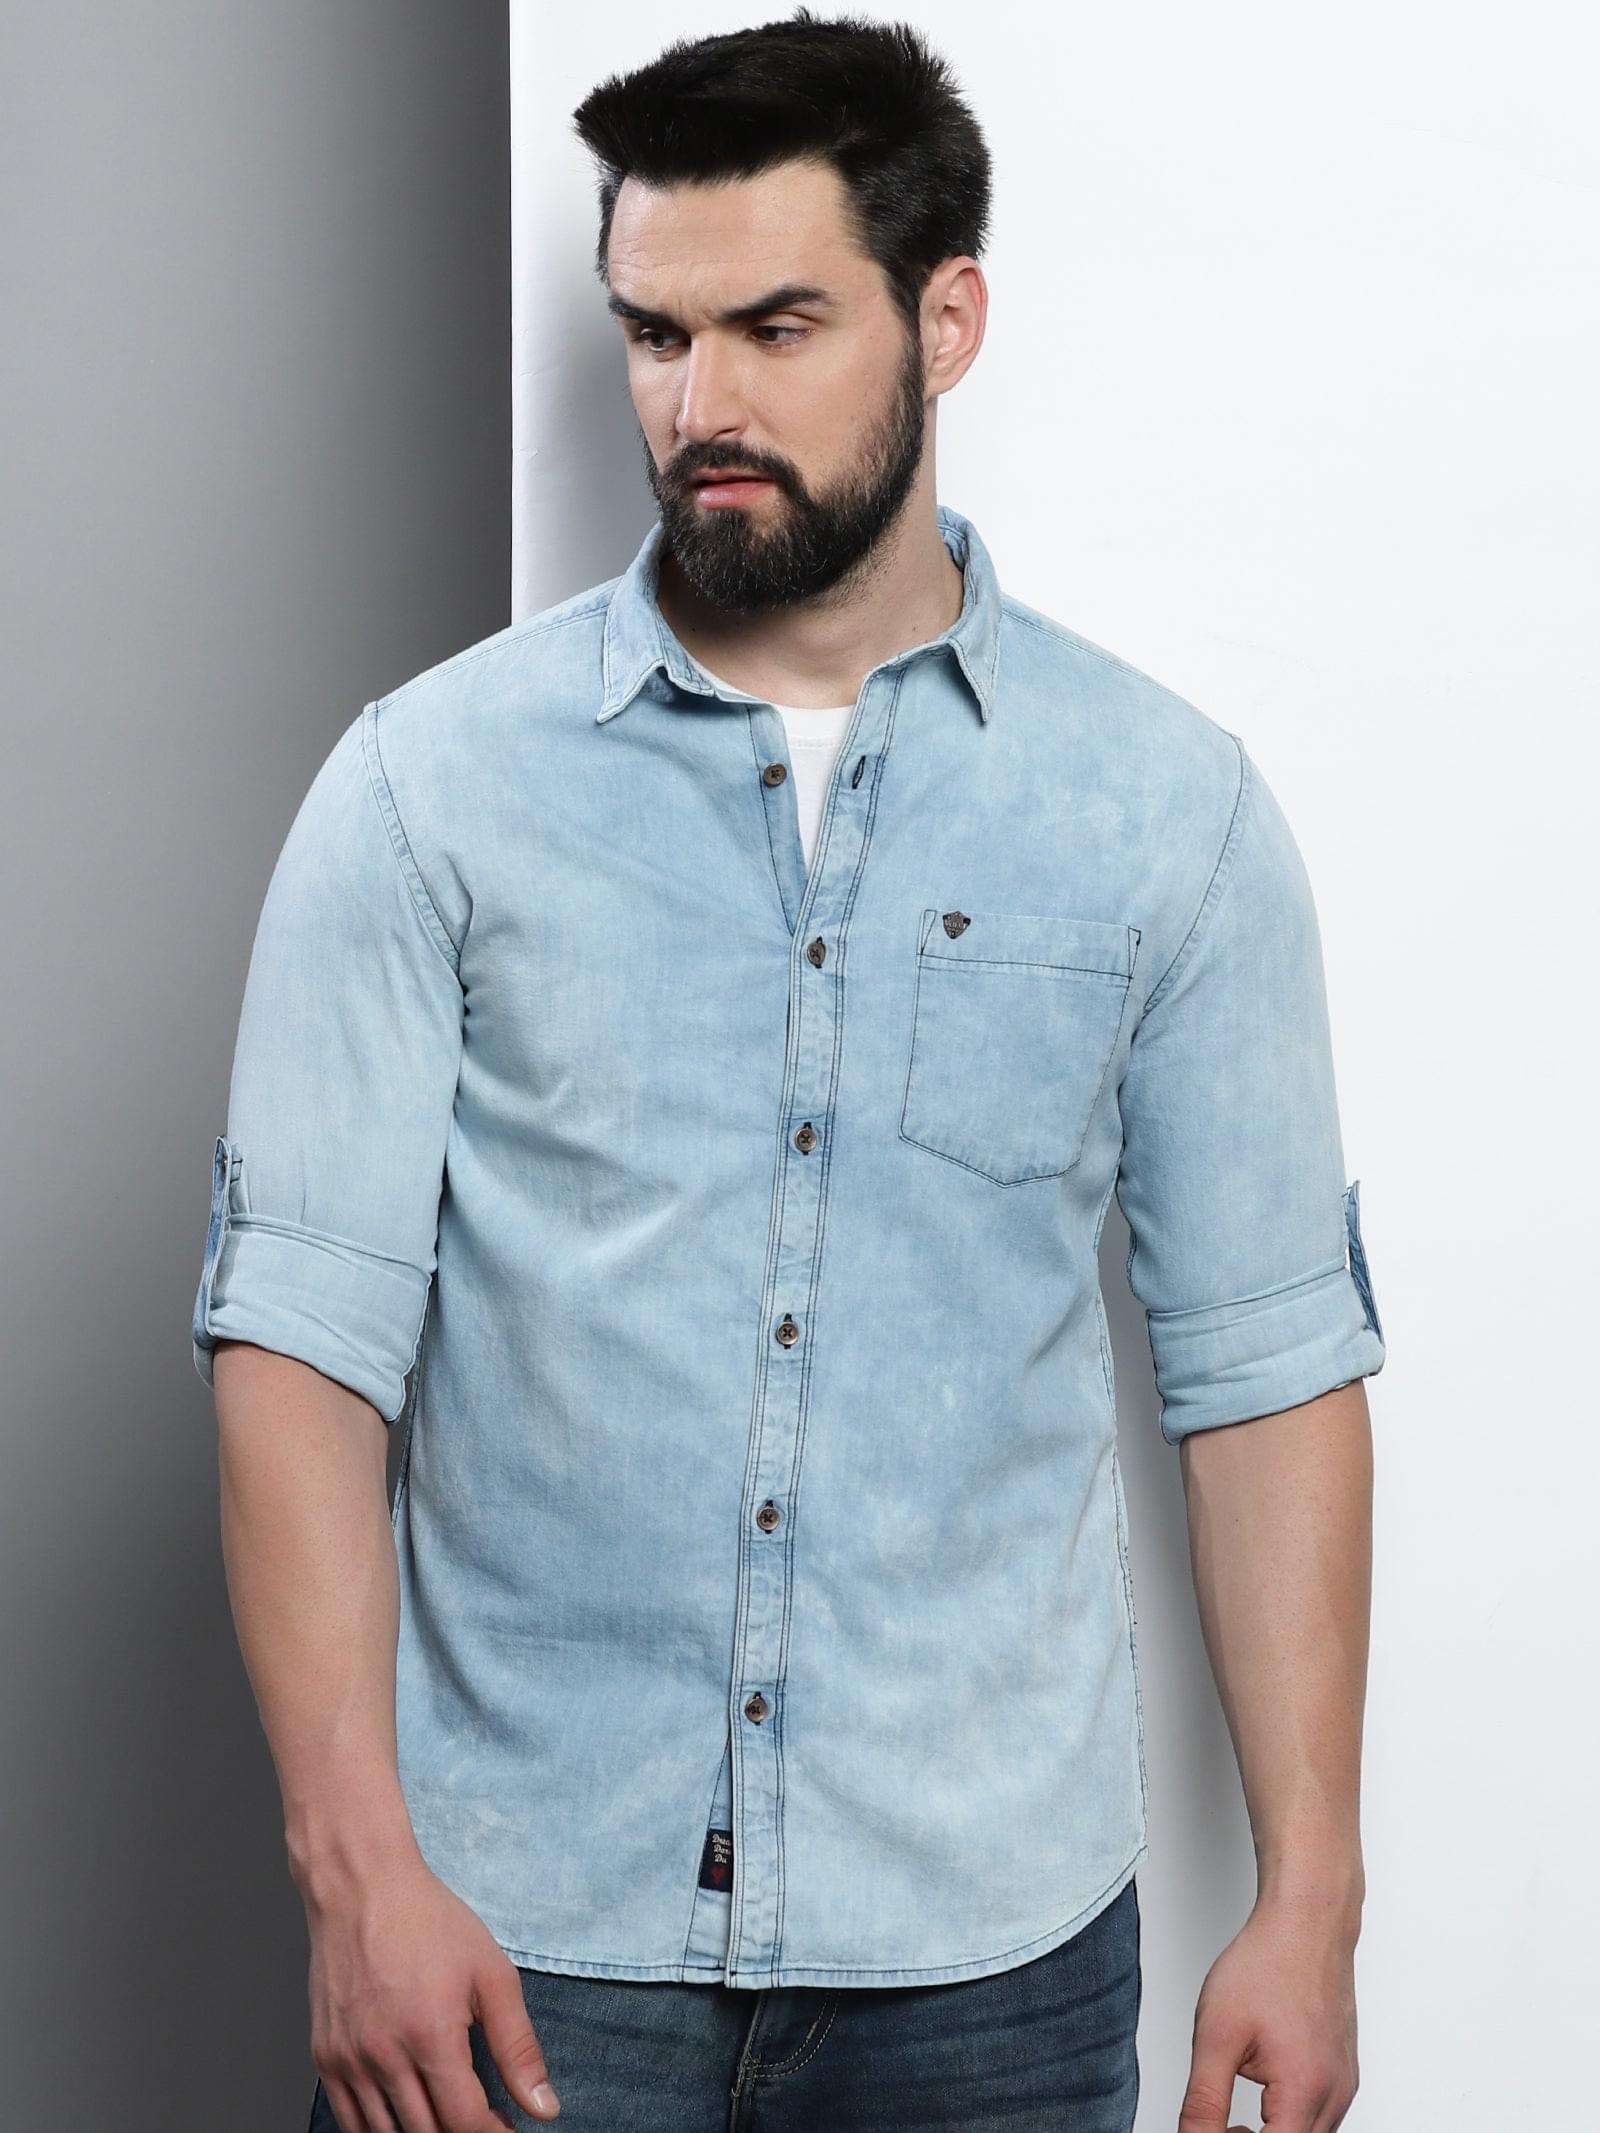 Westerly Denim Shirt | Mens Shirts | Outerknown